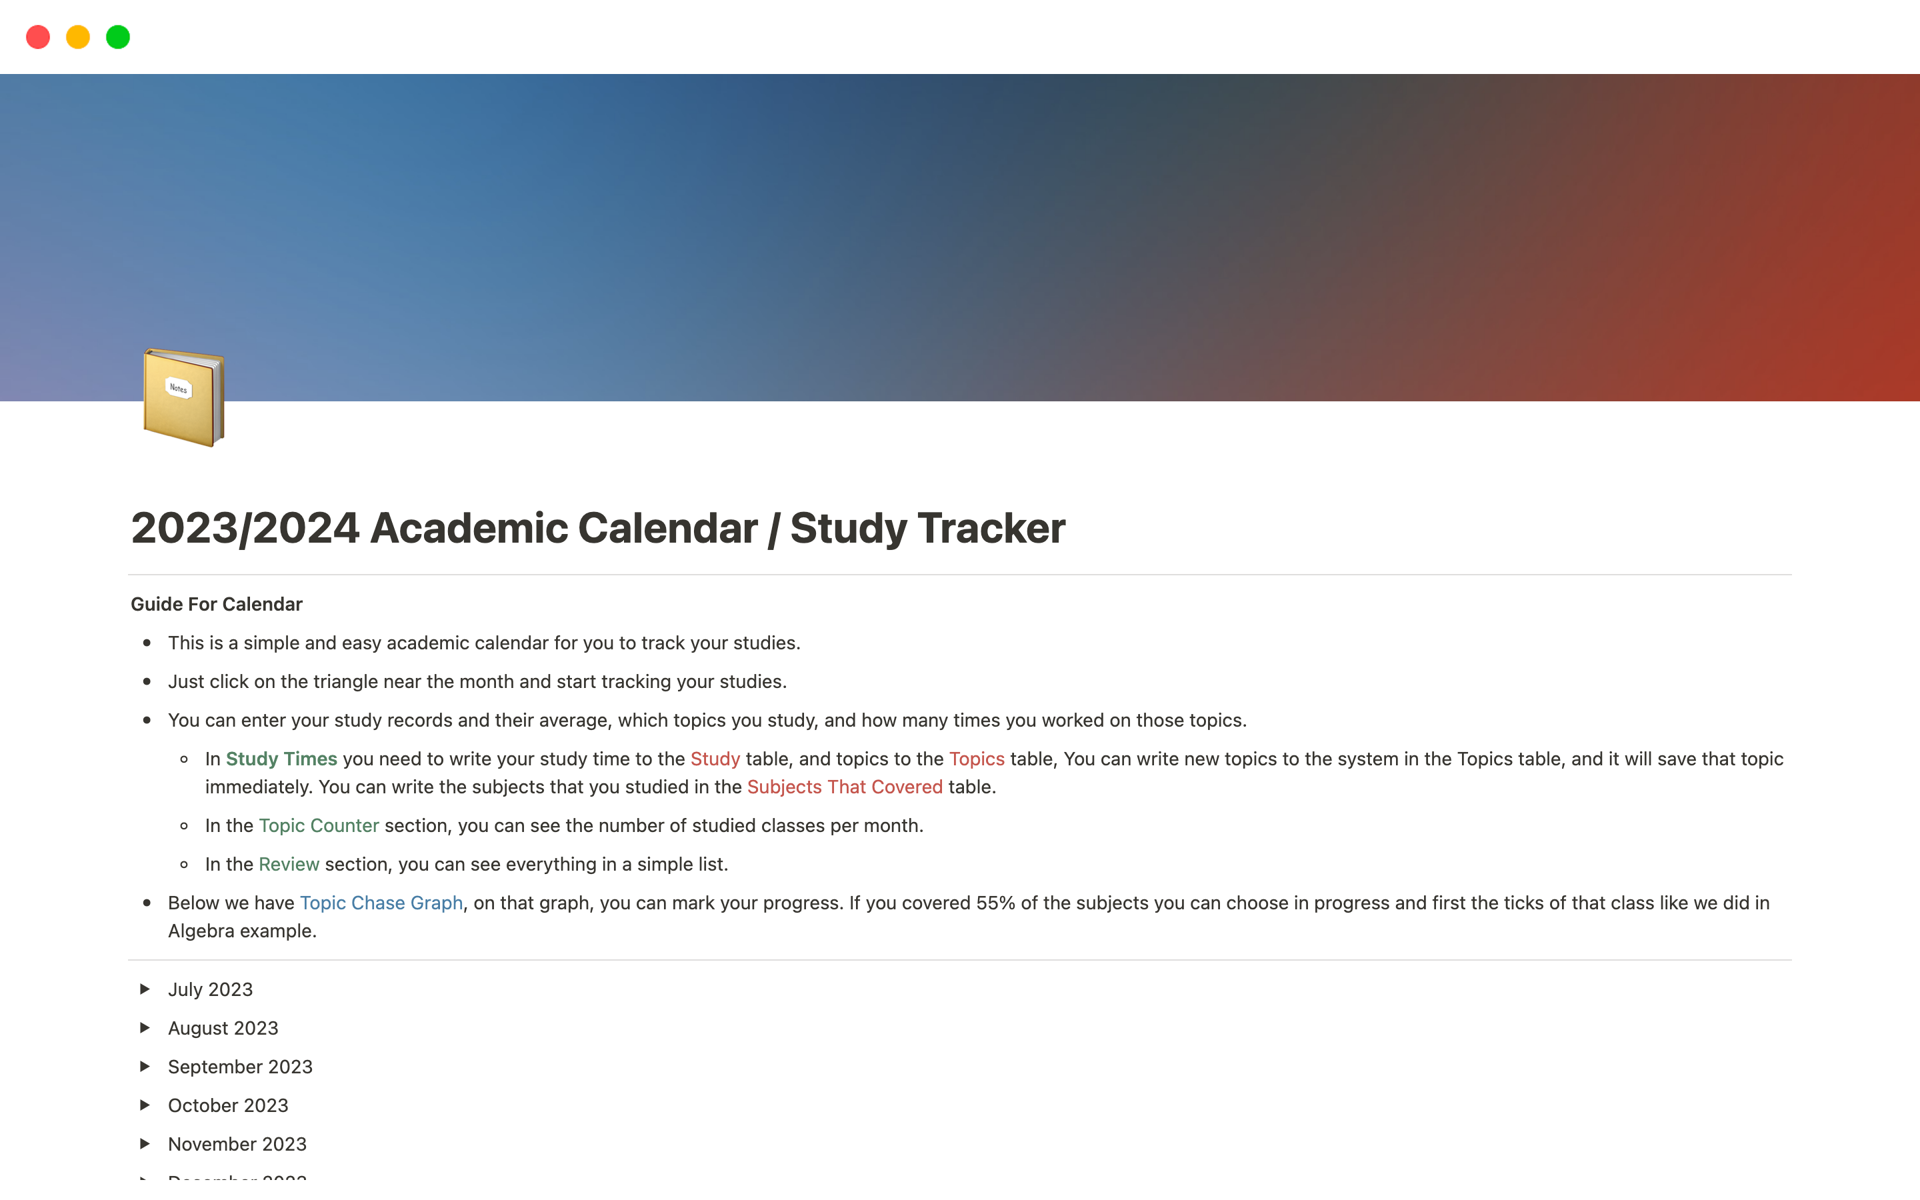 Here is a user-friendly study tracker that is incredibly easy to record and track your studies.